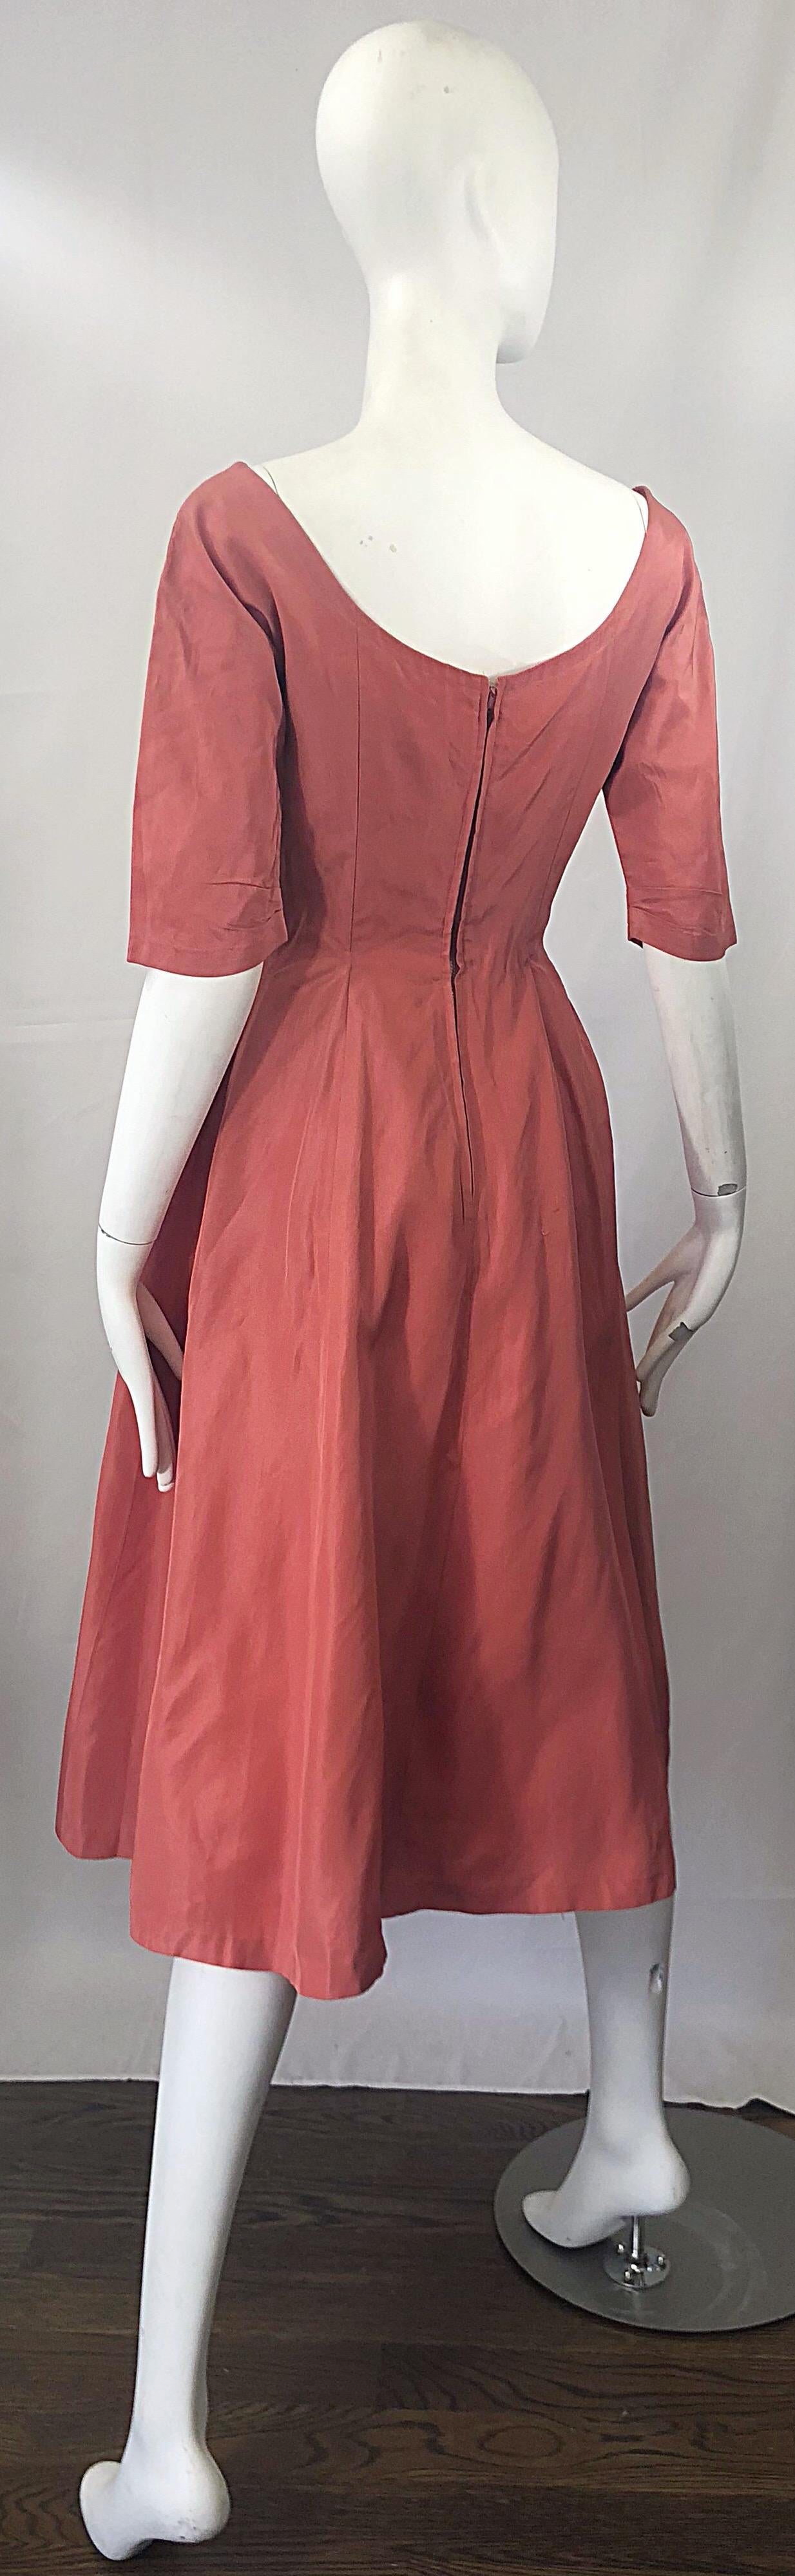 1950s Gigi Young Salmon Coral Pink Silk Taffeta Vintage 50s Fit n Flare Dress For Sale 5